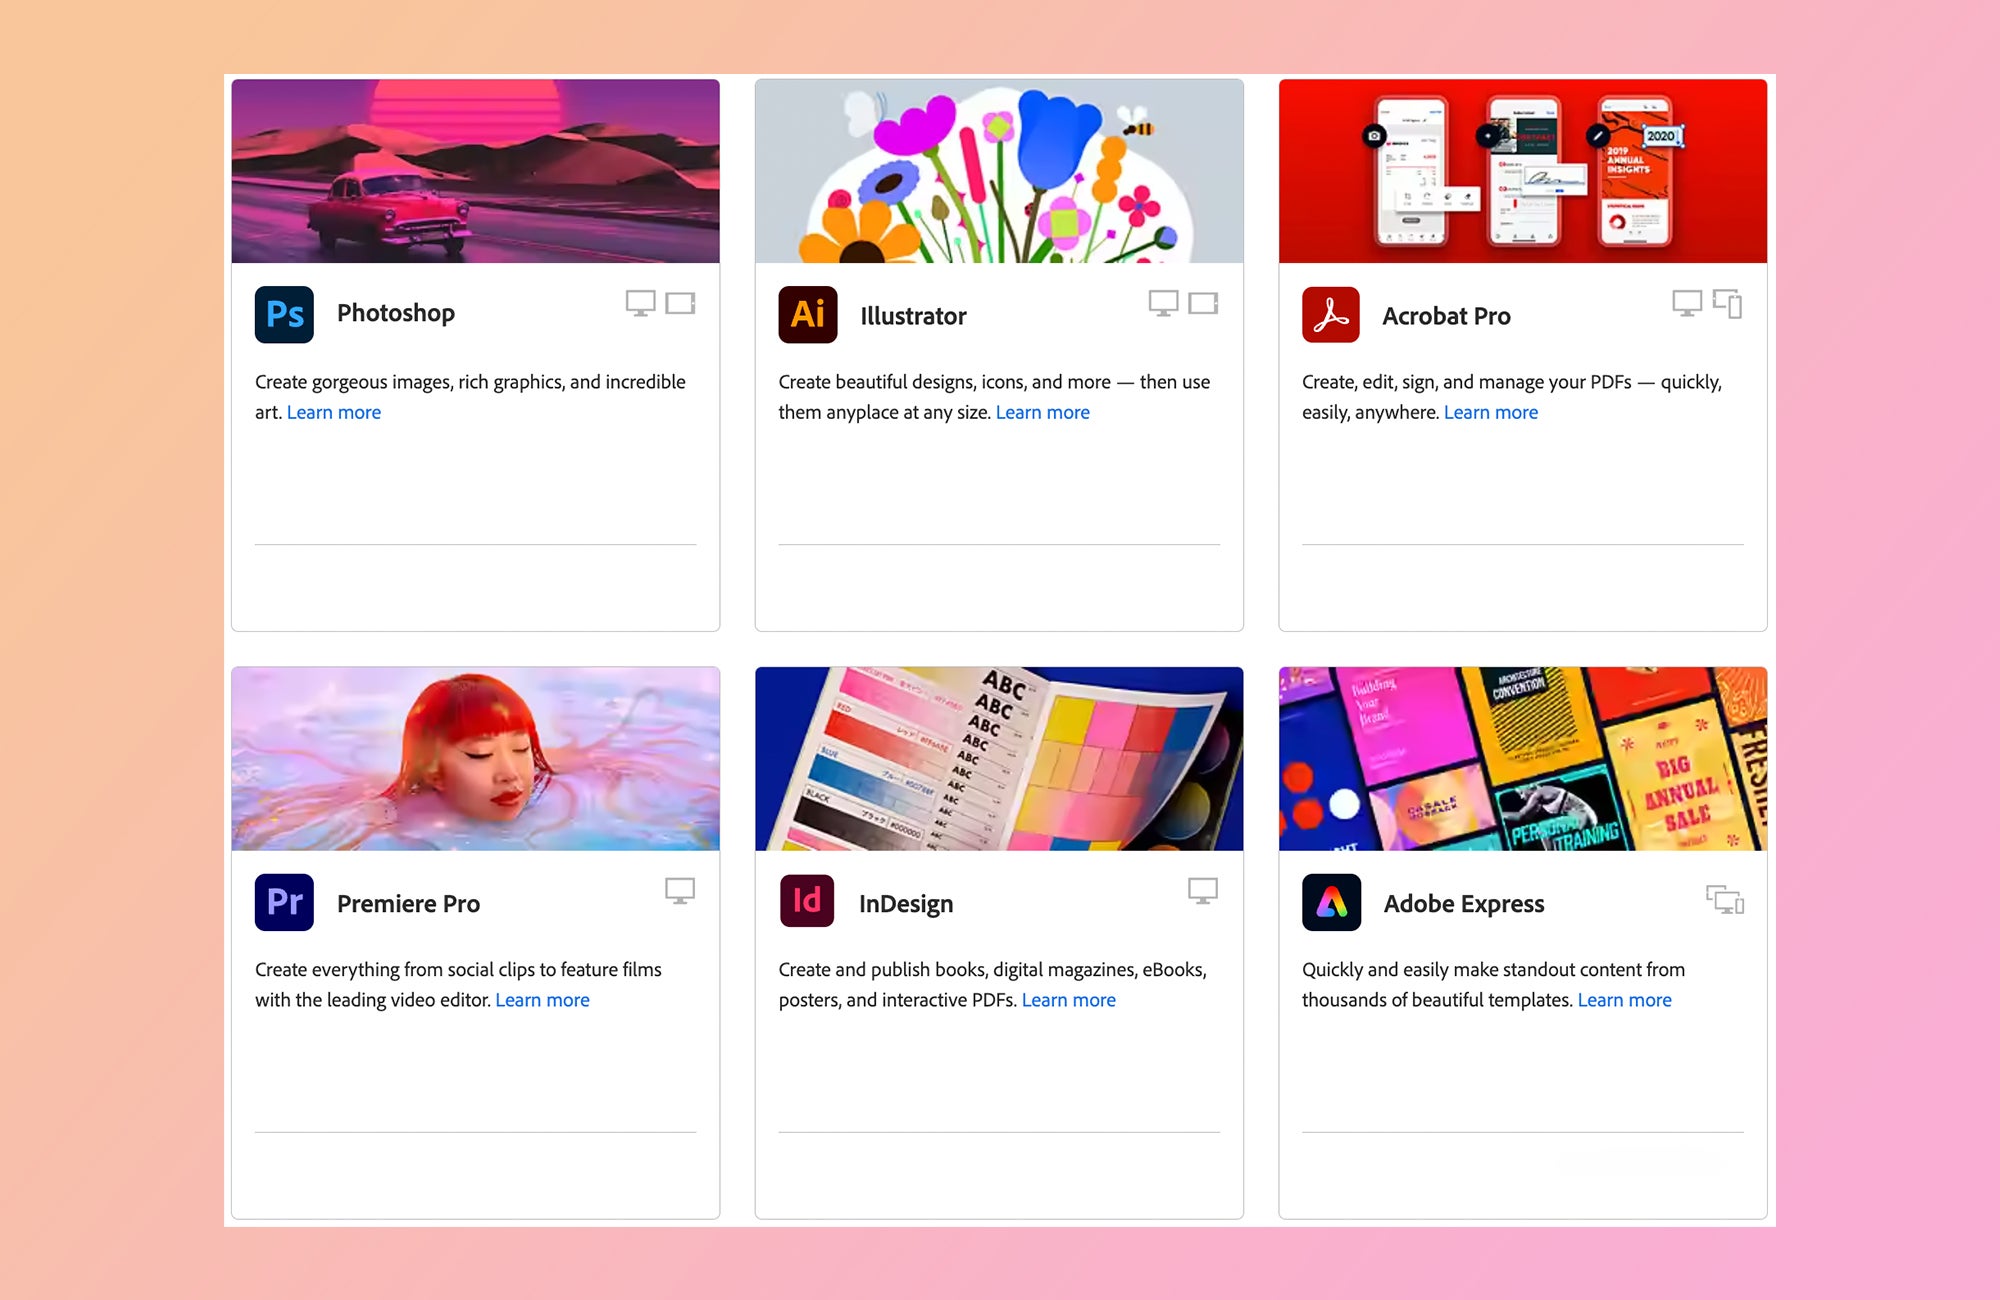 Save more than 60% on Adobe Creative Cloud right now if you're a student or teacher